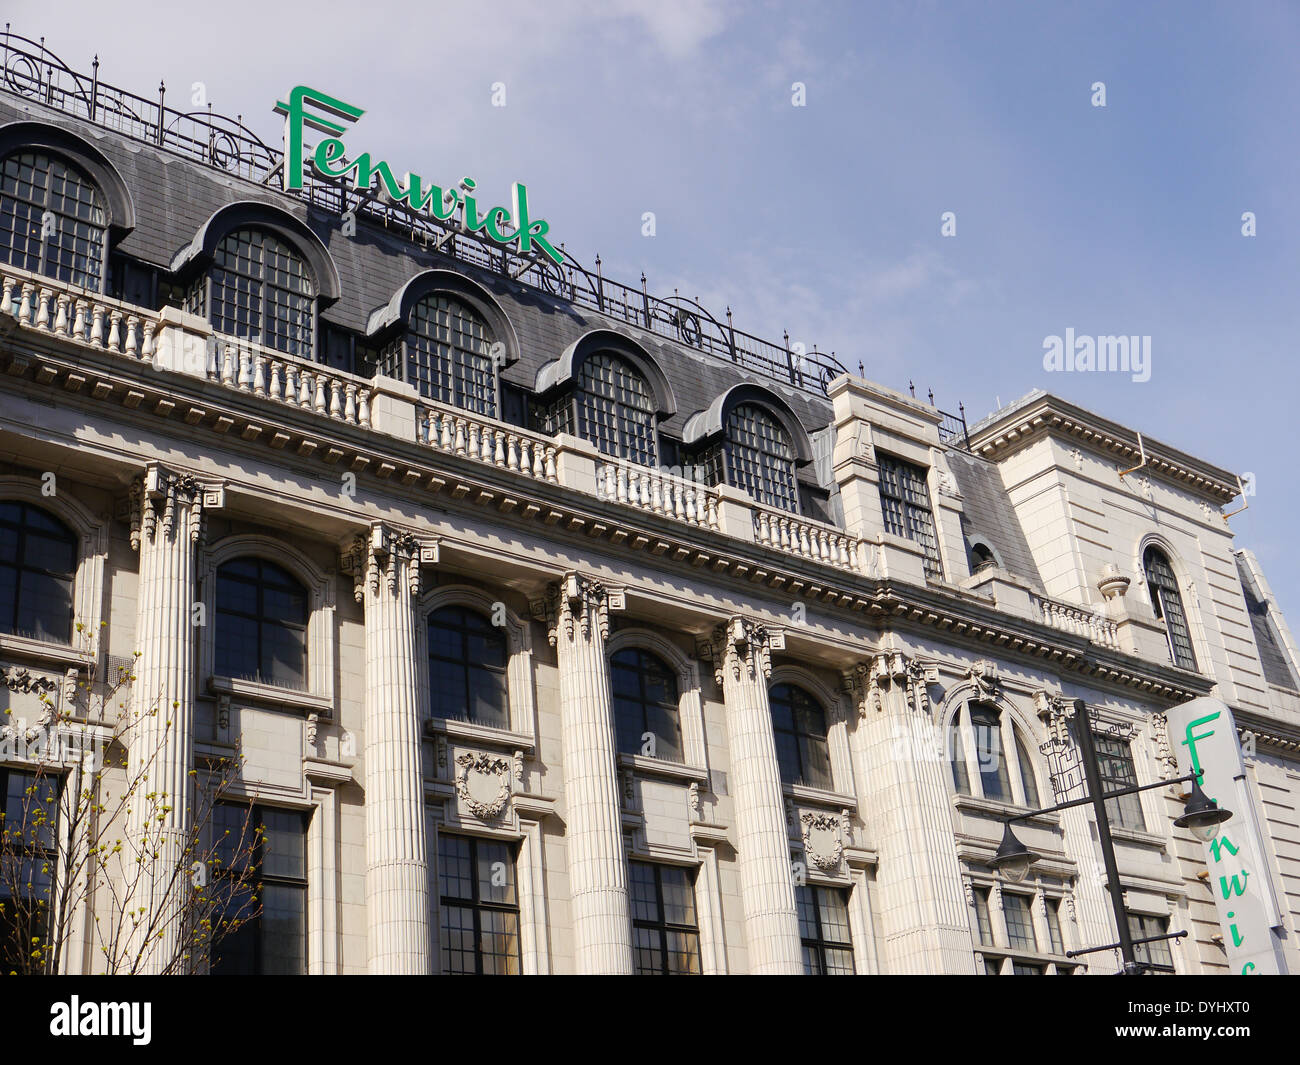 Architecture: built architectural features of Fenwick shop building, Northumberland Street, Newcastle upon Tyne, England, UK Stock Photo